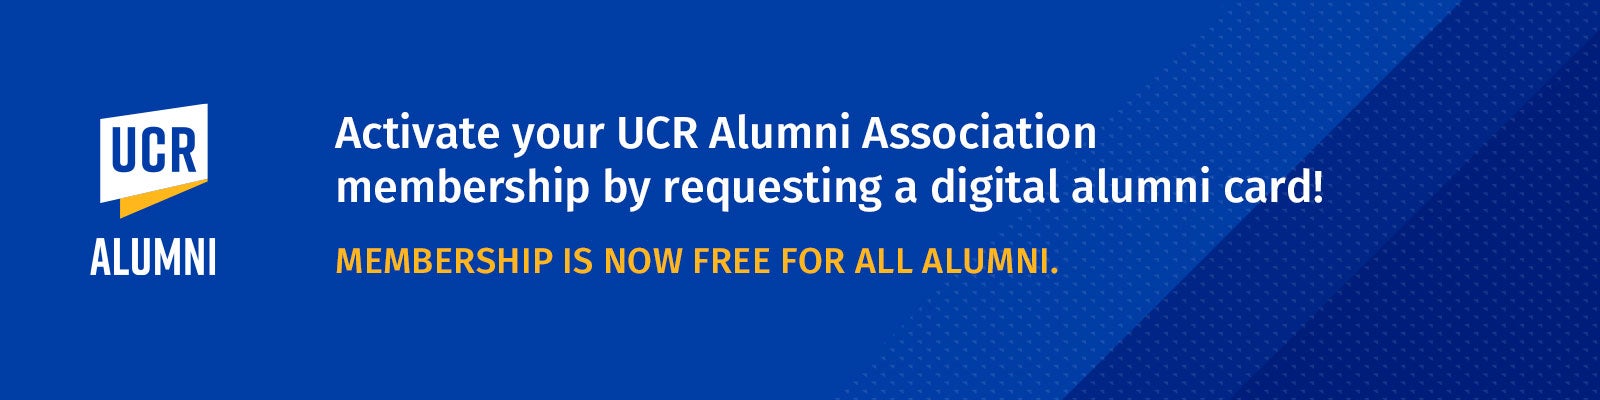 Activate your UCR Alumni Association membership by requesting a digital alumni card! Membership is now free for all alumni.